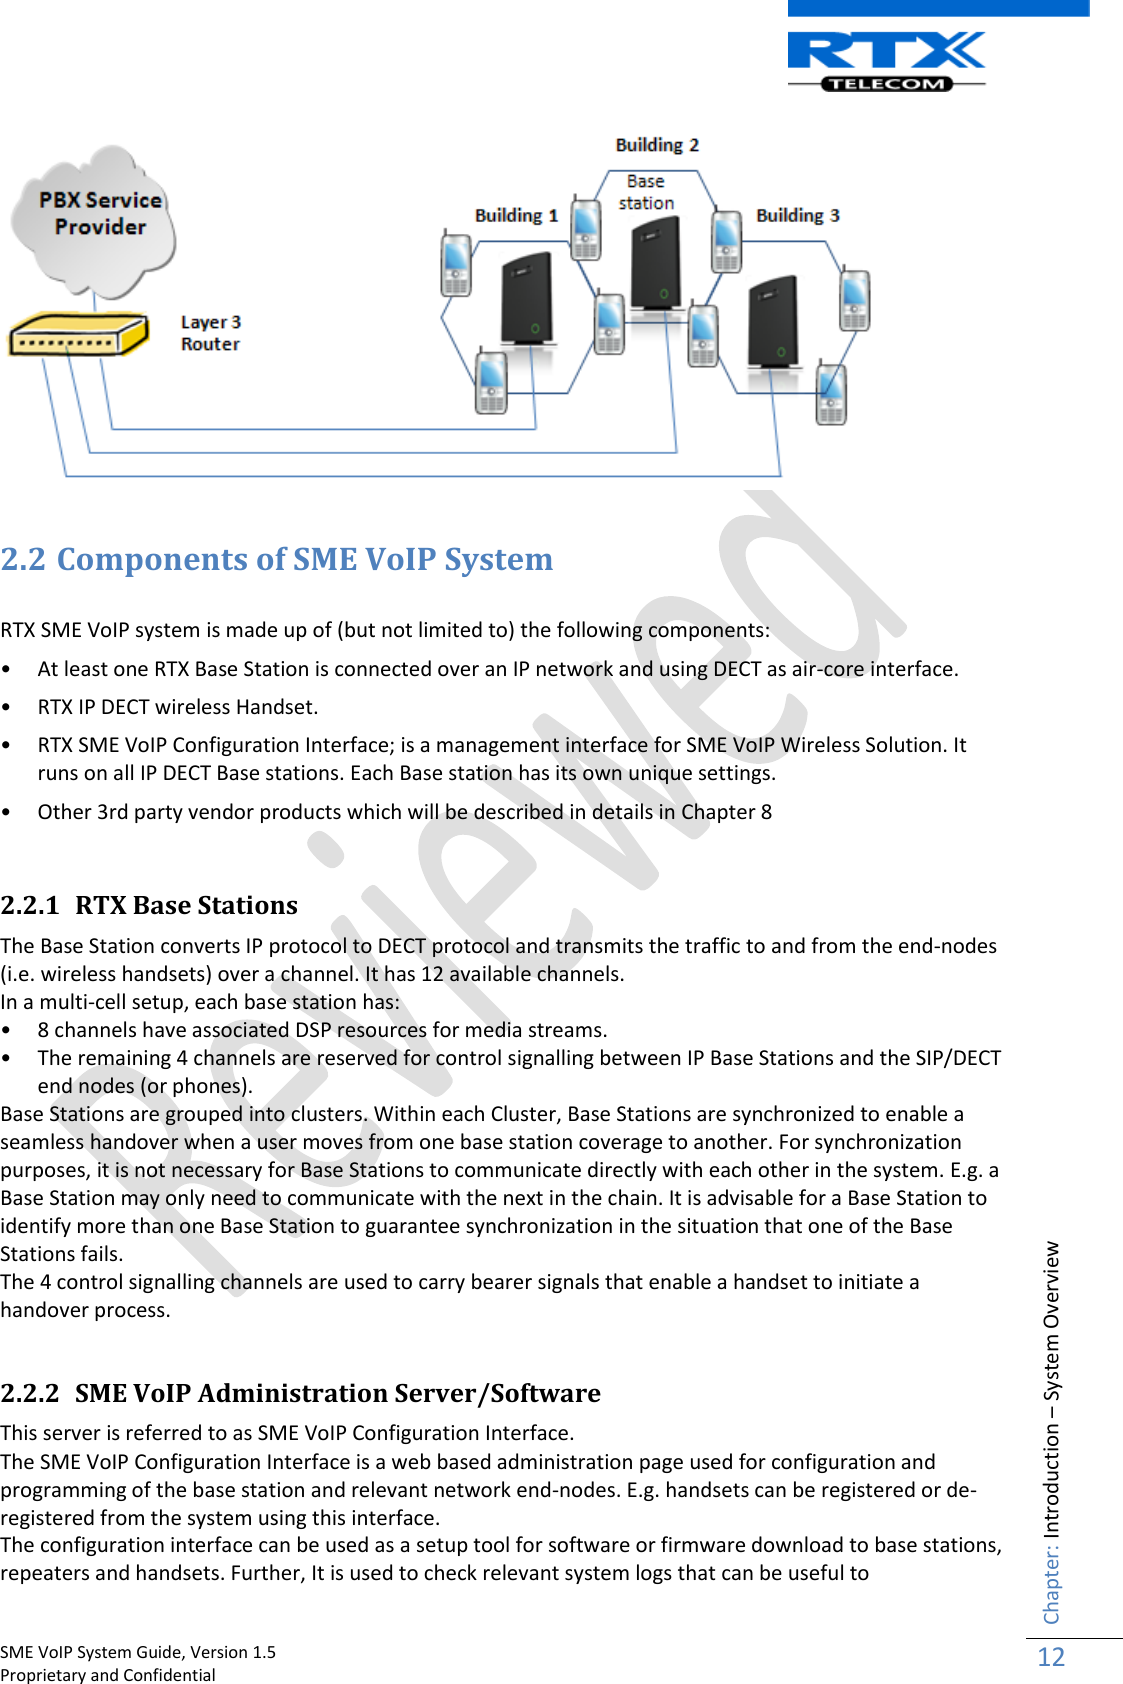    SME VoIP System Guide, Version 1.5                                                                                                                                                          Proprietary and Confidential    Chapter: Introduction – System Overview 12    2.2 Components of SME VoIP System  RTX SME VoIP system is made up of (but not limited to) the following components: • At least one RTX Base Station is connected over an IP network and using DECT as air-core interface. • RTX IP DECT wireless Handset. • RTX SME VoIP Configuration Interface; is a management interface for SME VoIP Wireless Solution. It runs on all IP DECT Base stations. Each Base station has its own unique settings.  • Other 3rd party vendor products which will be described in details in Chapter 8   2.2.1 RTX Base Stations The Base Station converts IP protocol to DECT protocol and transmits the traffic to and from the end-nodes (i.e. wireless handsets) over a channel. It has 12 available channels.  In a multi-cell setup, each base station has: • 8 channels have associated DSP resources for media streams. • The remaining 4 channels are reserved for control signalling between IP Base Stations and the SIP/DECT end nodes (or phones). Base Stations are grouped into clusters. Within each Cluster, Base Stations are synchronized to enable a seamless handover when a user moves from one base station coverage to another. For synchronization purposes, it is not necessary for Base Stations to communicate directly with each other in the system. E.g. a Base Station may only need to communicate with the next in the chain. It is advisable for a Base Station to identify more than one Base Station to guarantee synchronization in the situation that one of the Base Stations fails. The 4 control signalling channels are used to carry bearer signals that enable a handset to initiate a handover process.  2.2.2 SME VoIP Administration Server/Software This server is referred to as SME VoIP Configuration Interface. The SME VoIP Configuration Interface is a web based administration page used for configuration and programming of the base station and relevant network end-nodes. E.g. handsets can be registered or de-registered from the system using this interface.  The configuration interface can be used as a setup tool for software or firmware download to base stations, repeaters and handsets. Further, It is used to check relevant system logs that can be useful to 